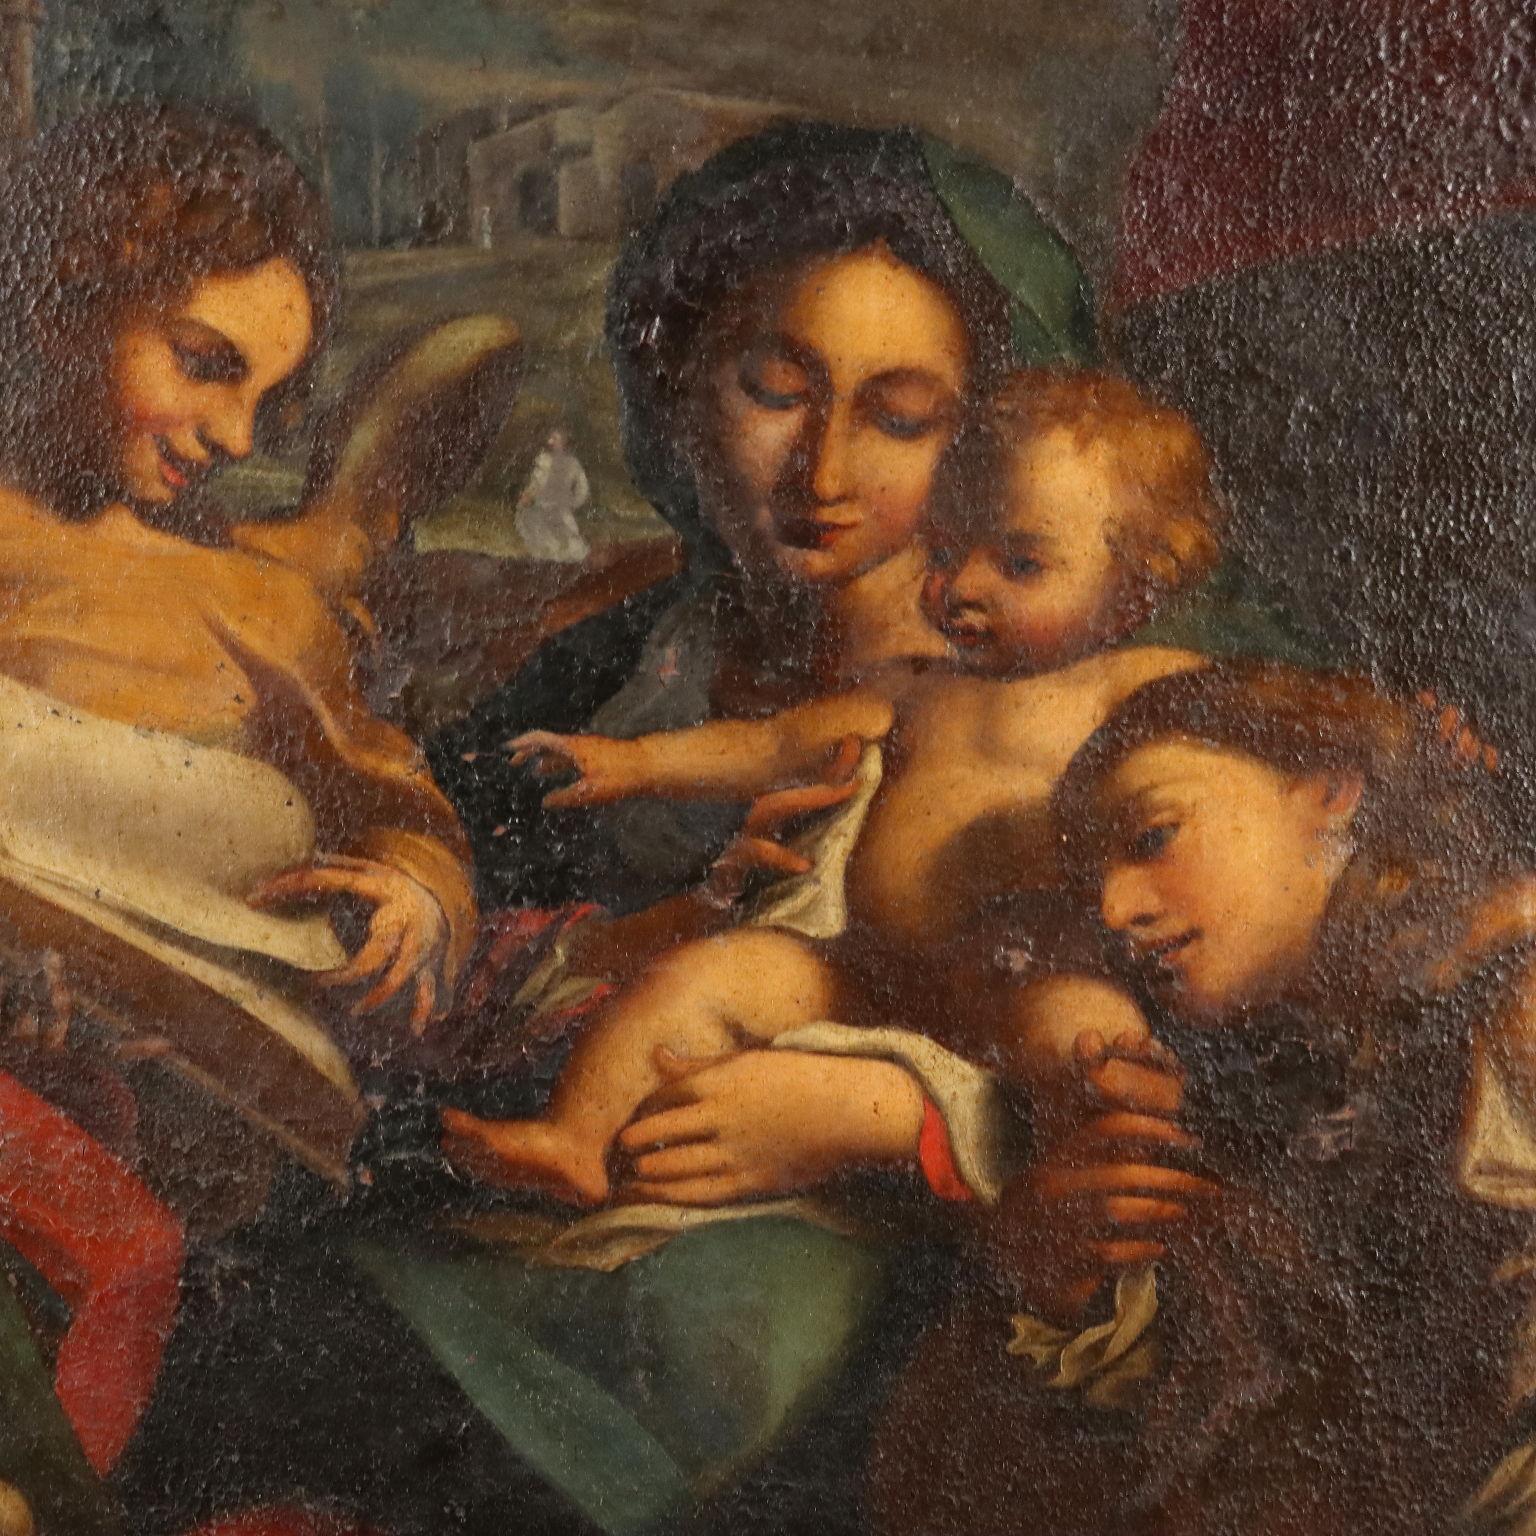 Oil on Canvas. Emilian school of the 17th-18th centuries.
This is an early copy of Correggio's famous panel painting entitled La Madonna di San Girolamo or Il Giorno (Our Lady of St. Jerome or The Day), dated around 1528 and now in the National